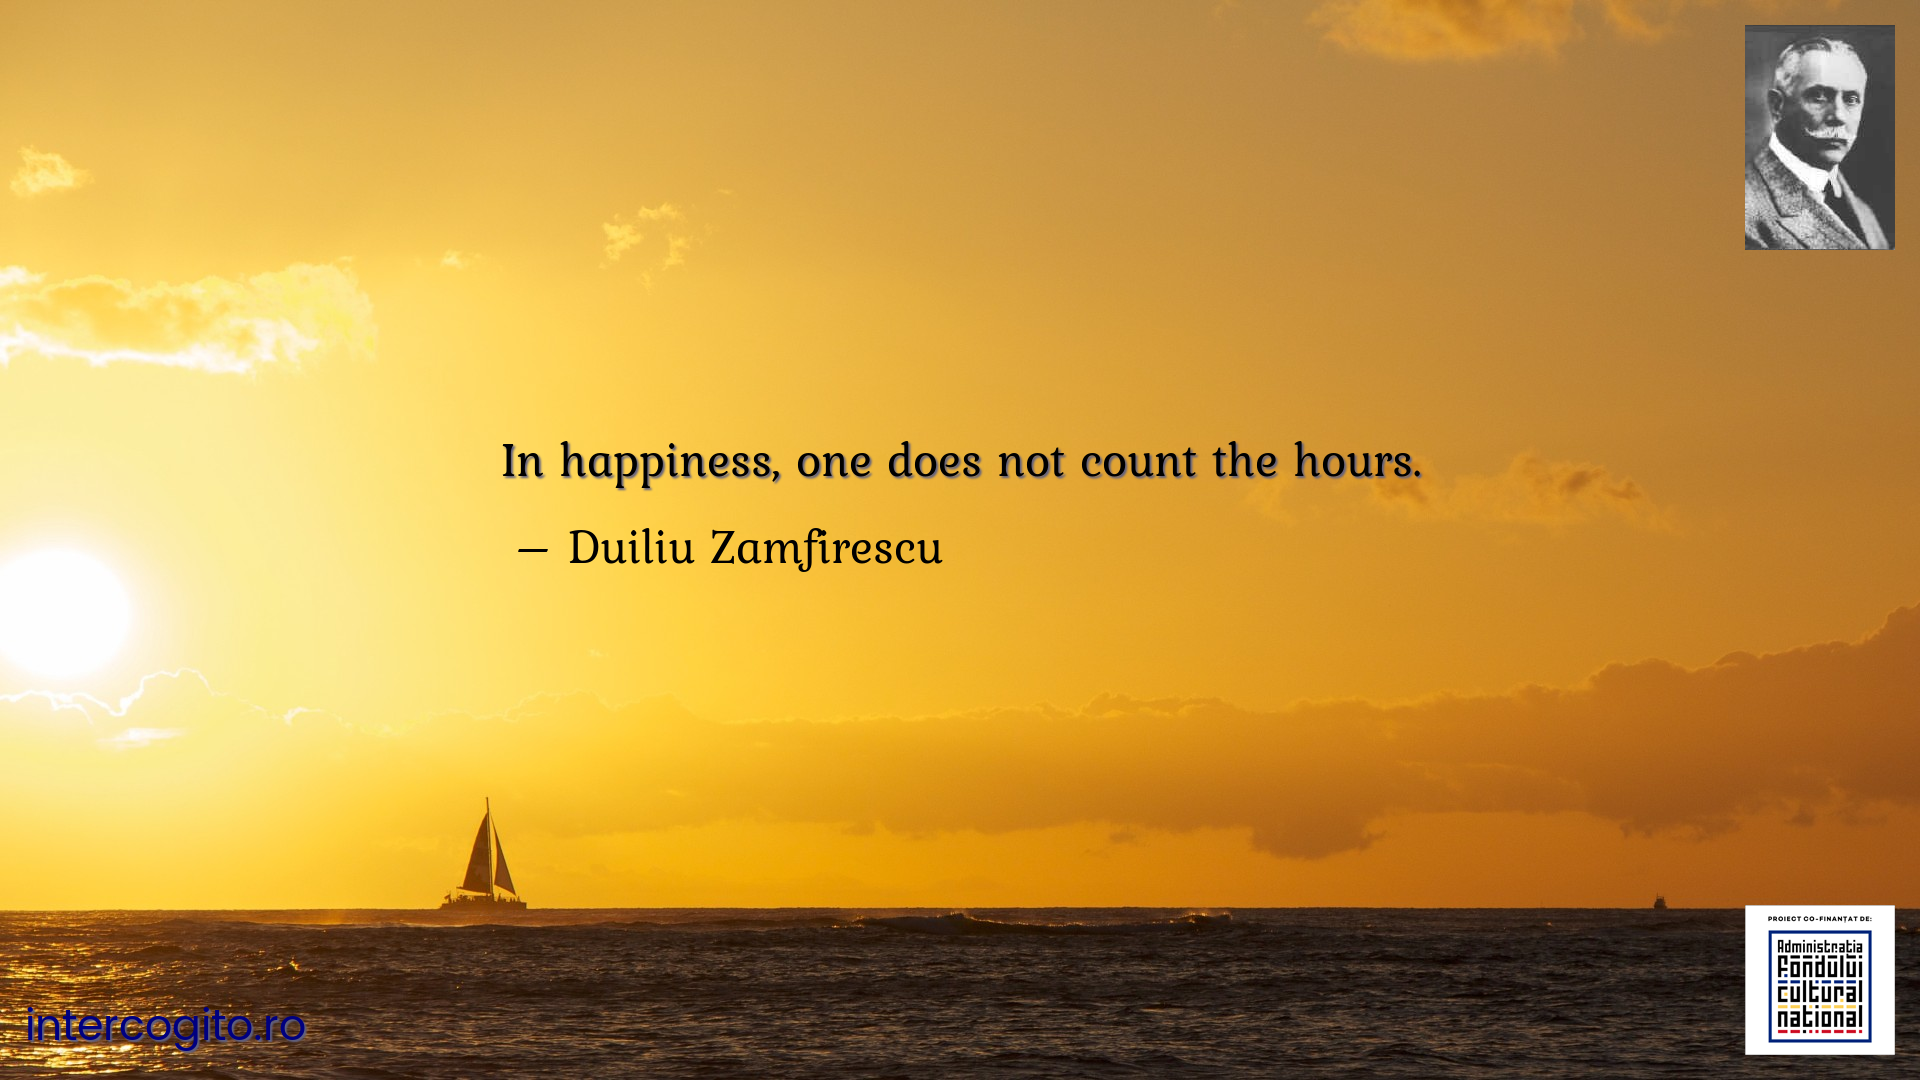 In happiness, one does not count the hours.